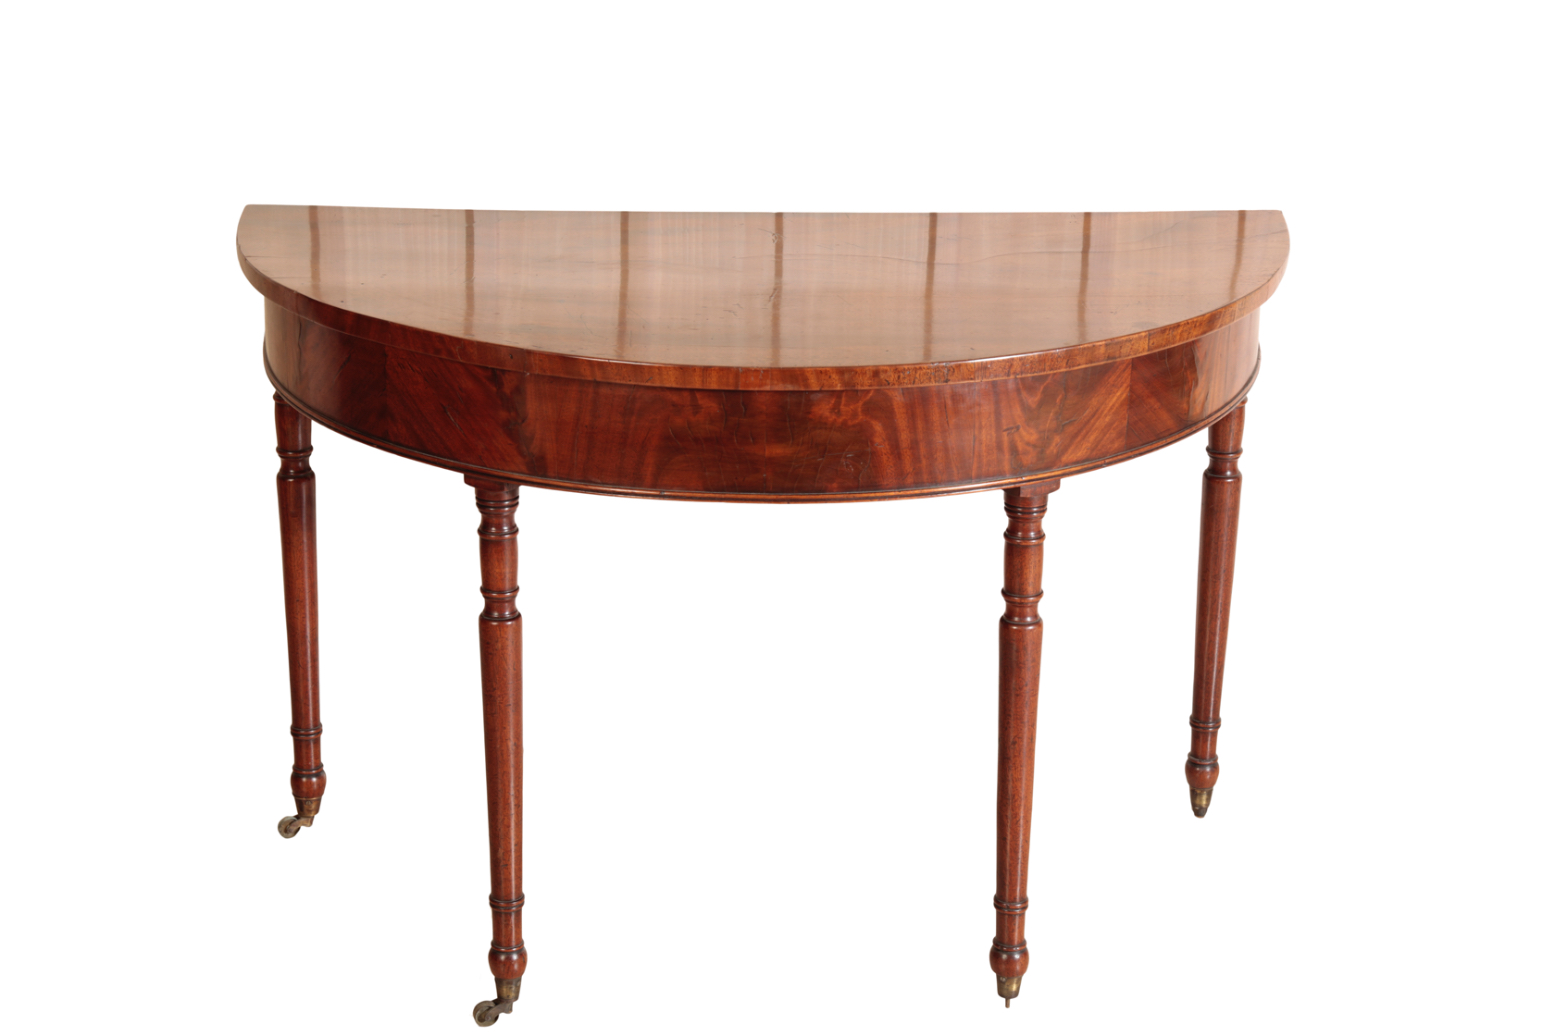 A MAHOGANY D-SHAPED SIDE TABLE first